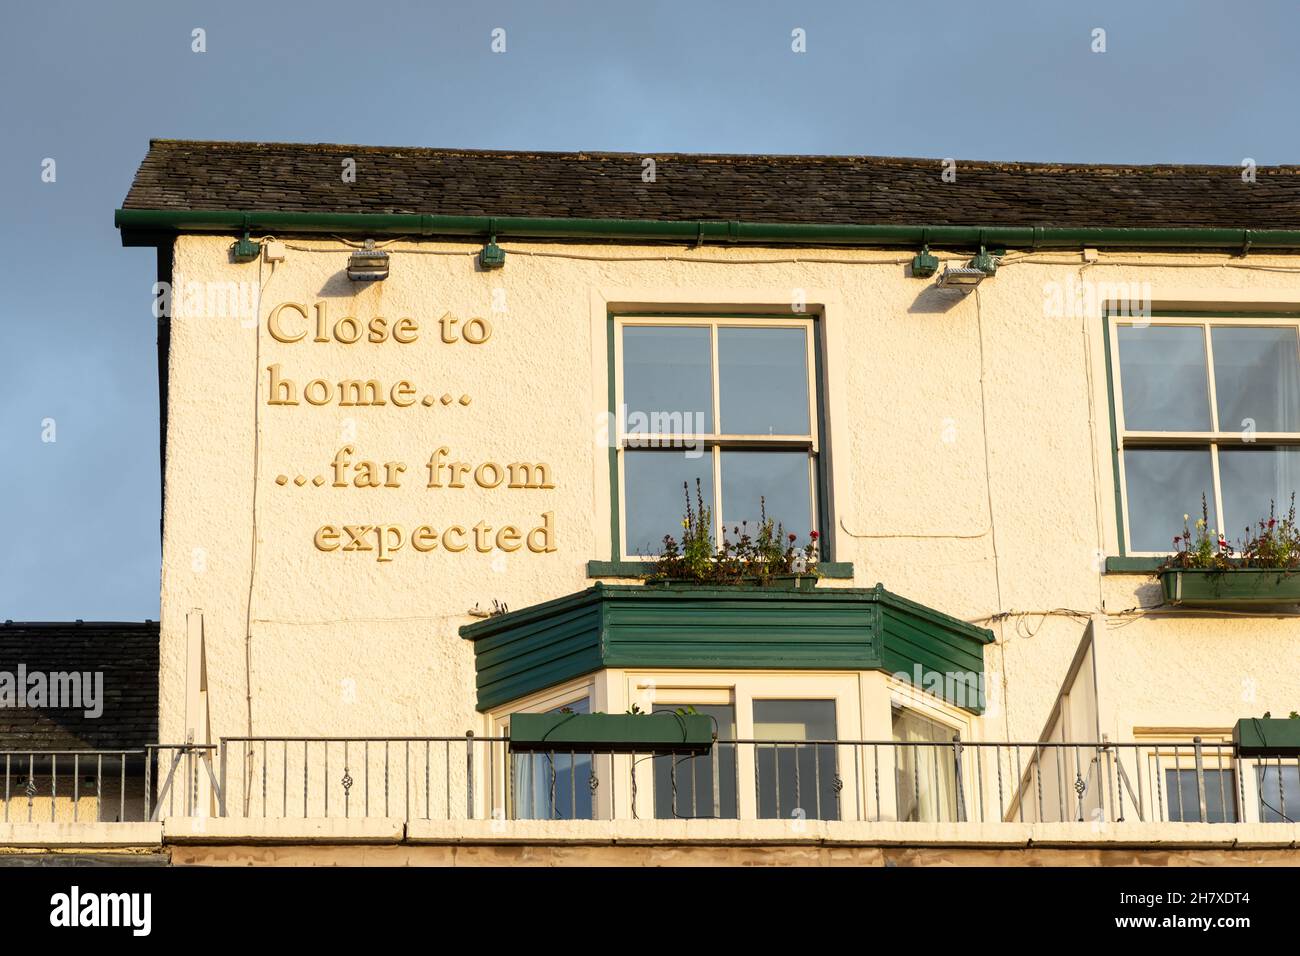 Ambleside Salutation Health Club and Spa, „Close to Home... far from expected“, Worte an der Außenwand des Hotels, Lake District, Cumbria, Großbritannien Stockfoto